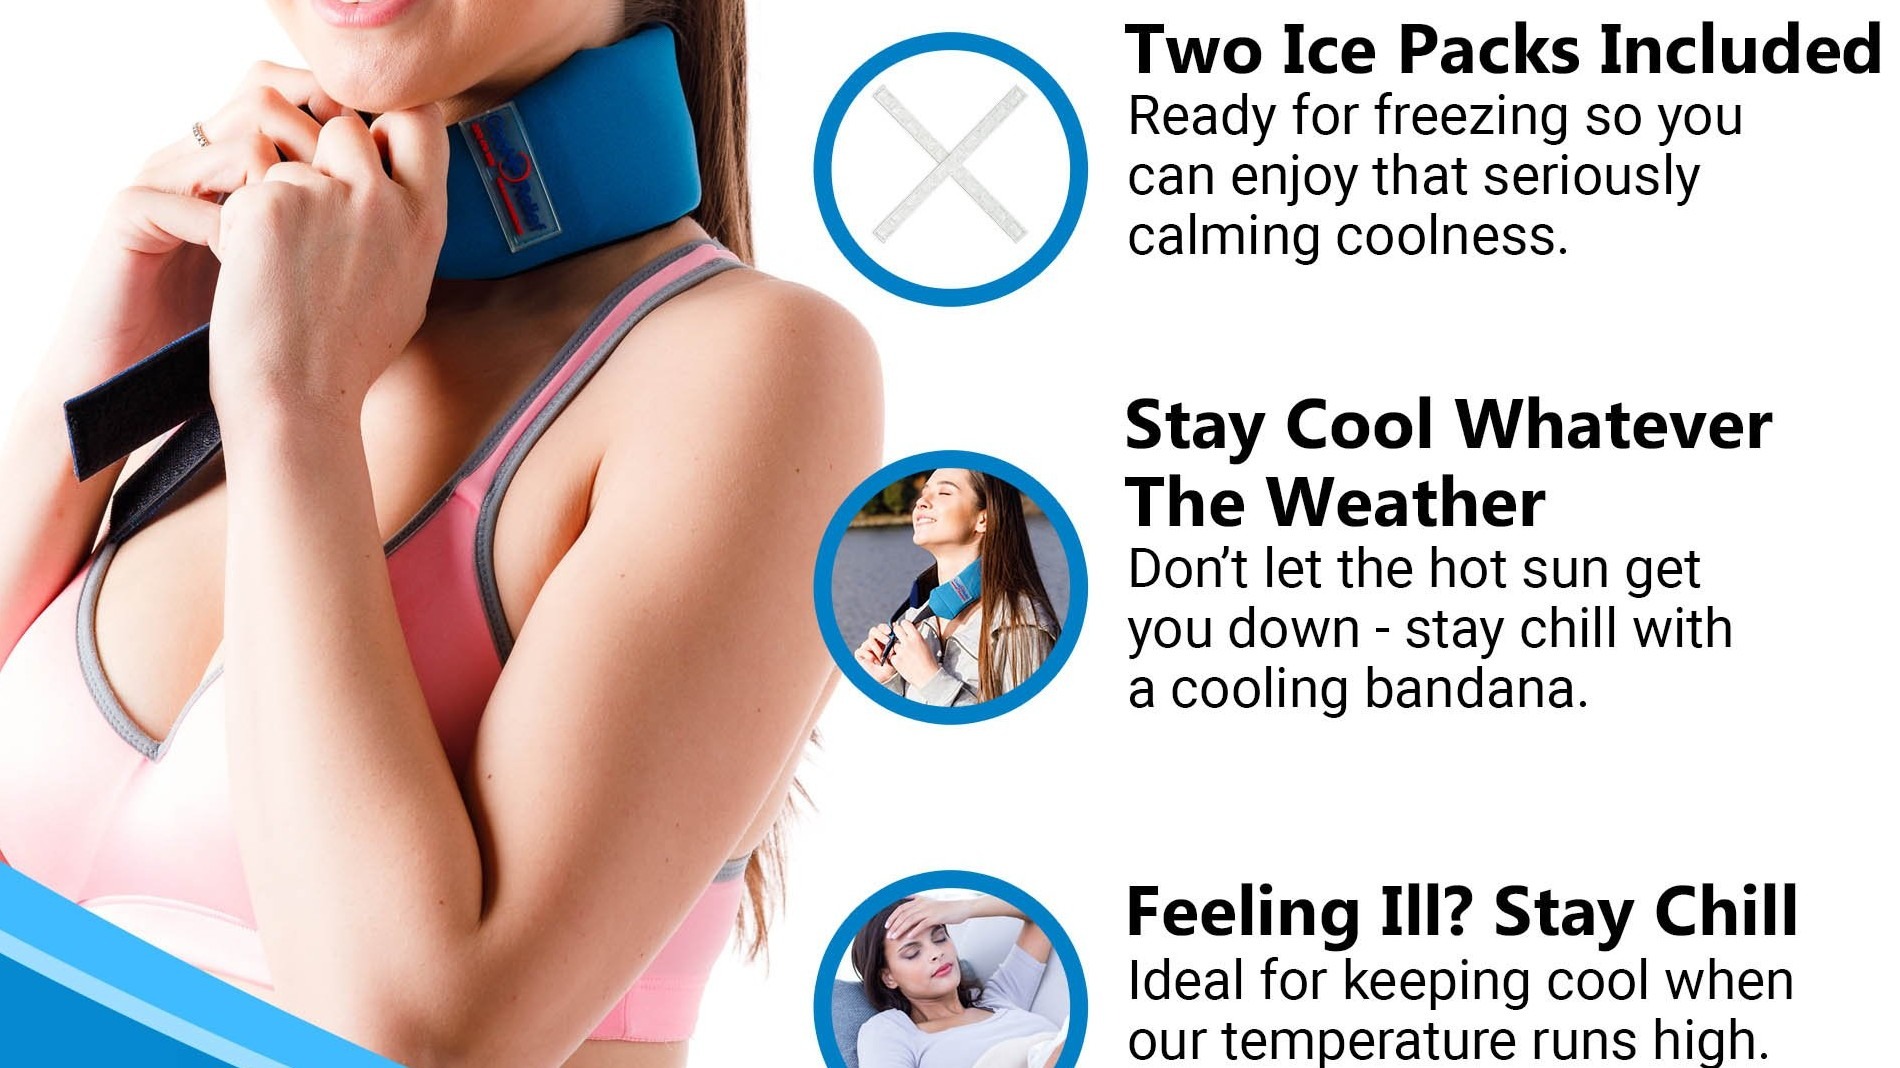 Use This Ice Wrap For Neck Pain To Relieve Stiff Joints & Tight Muscles